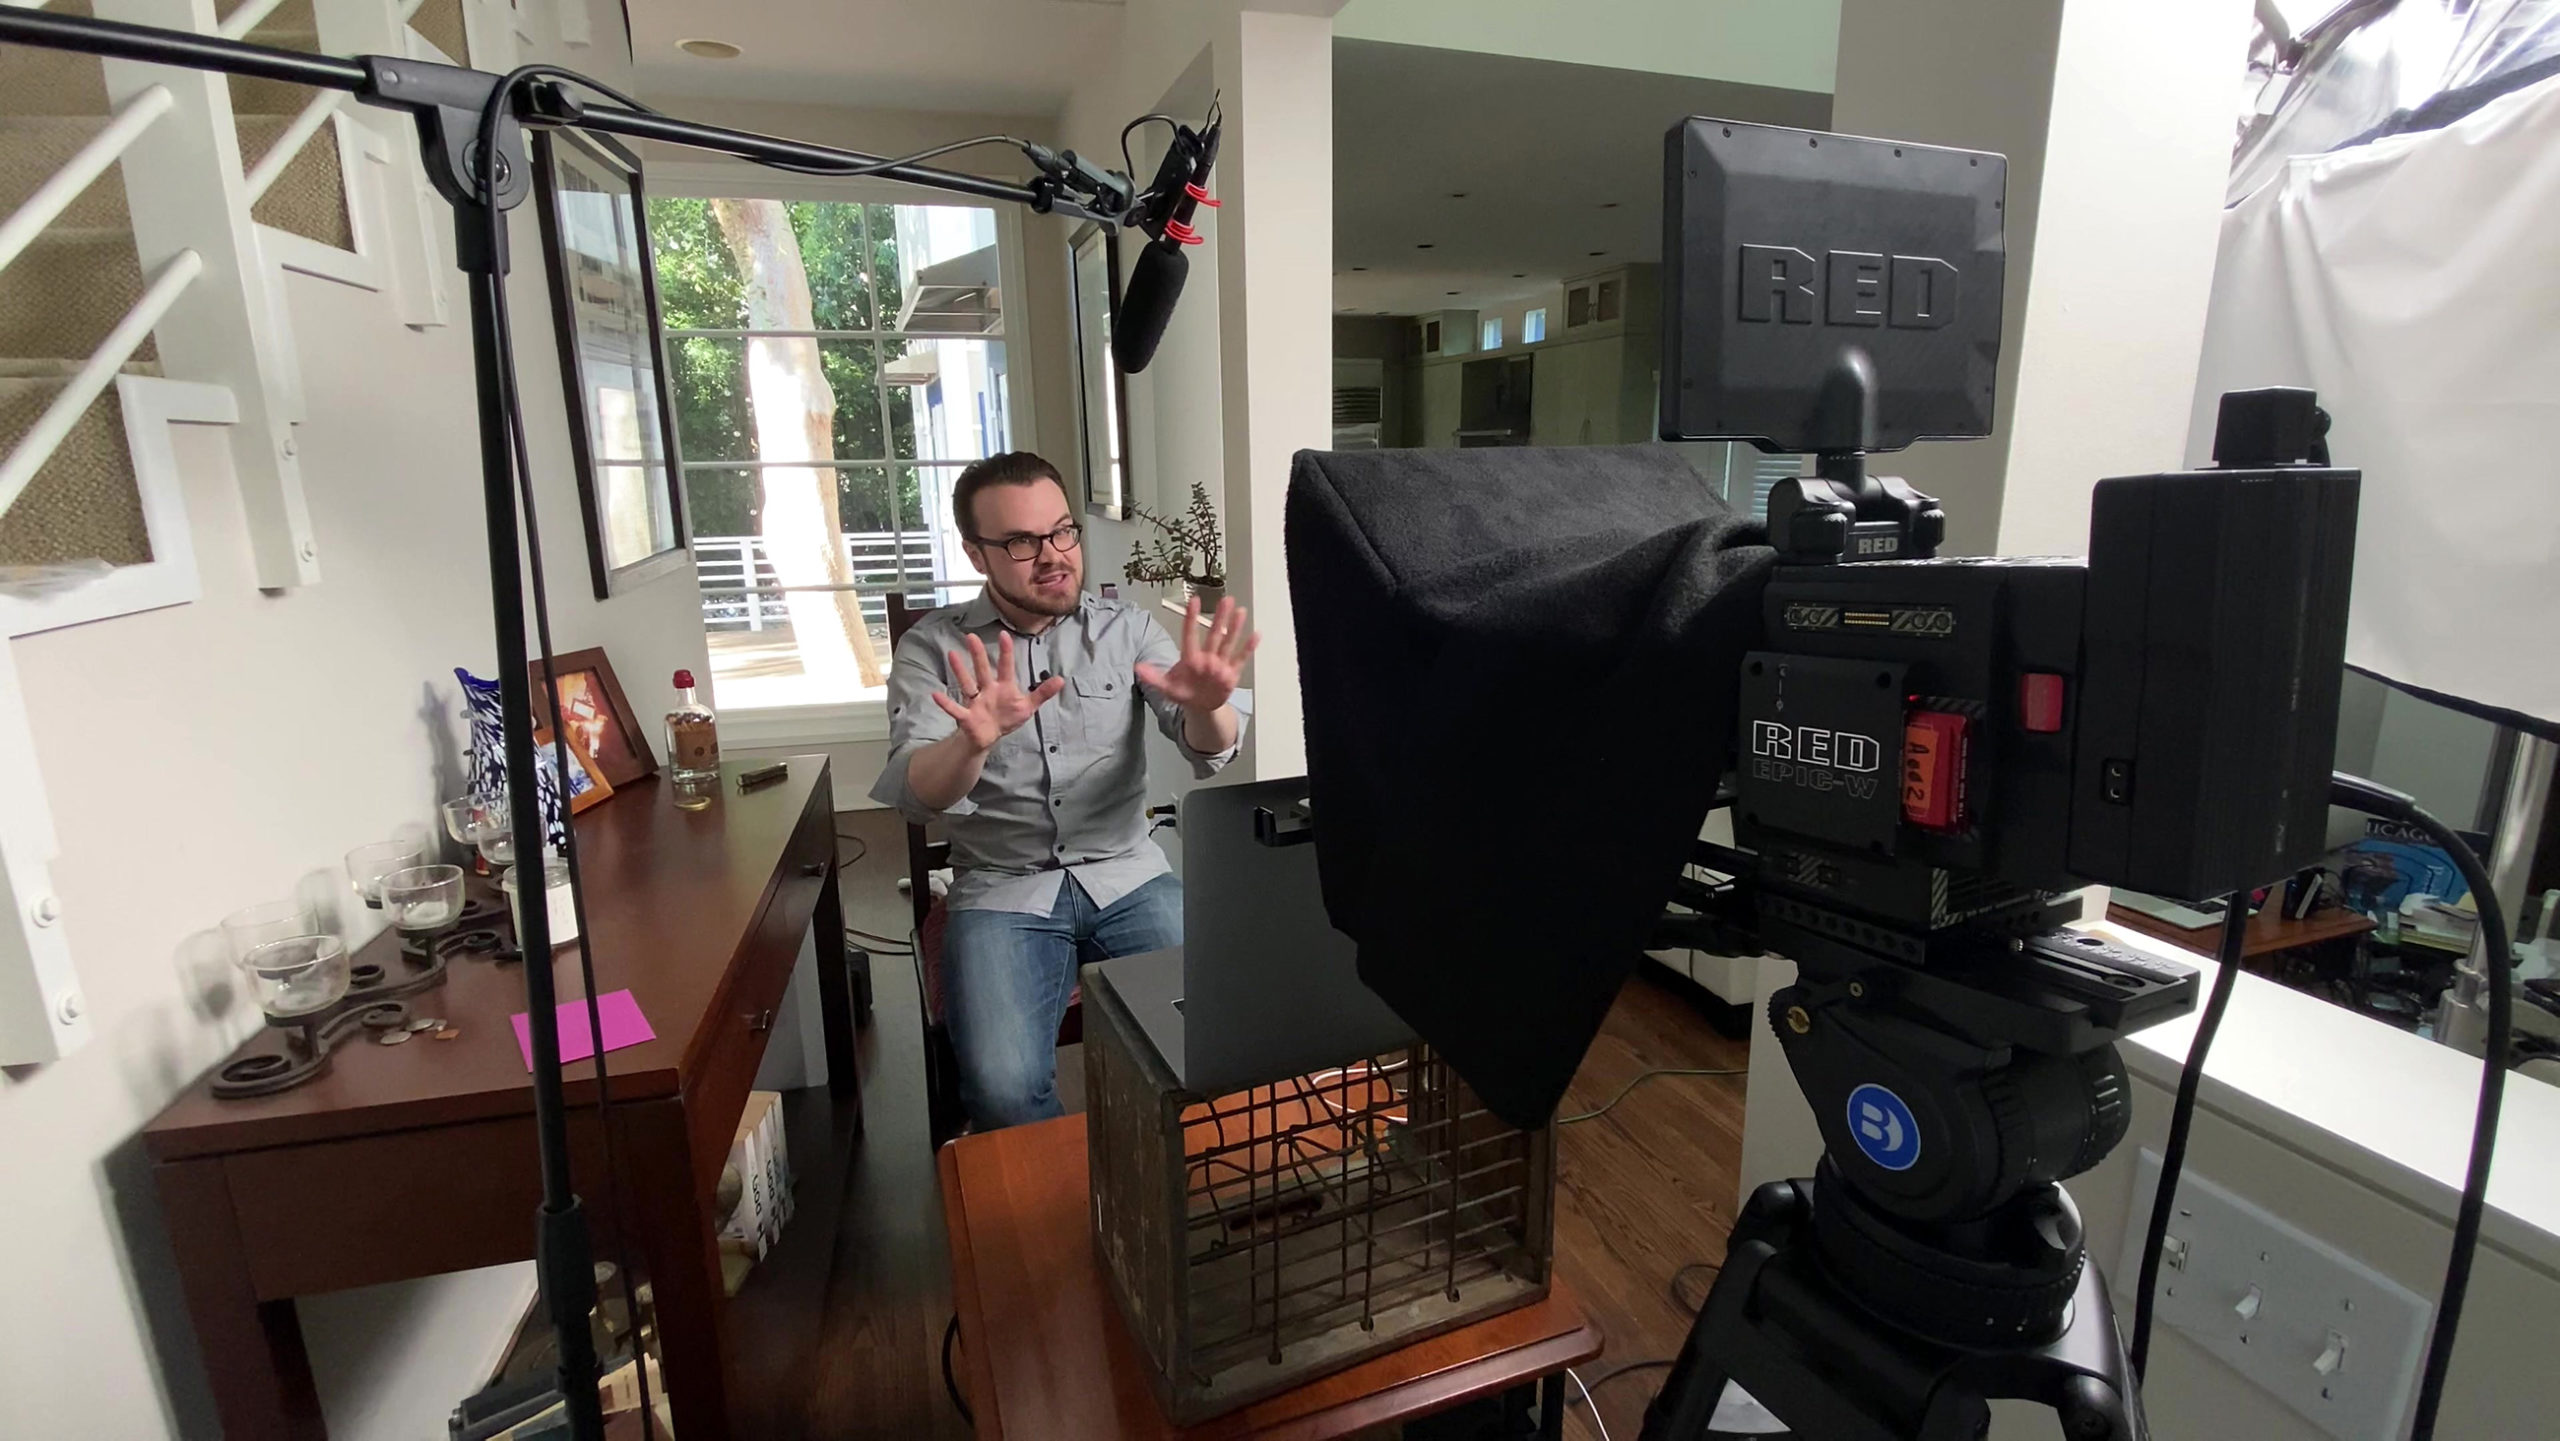 Michael Cioni demonstrates a fully remote video production workflow